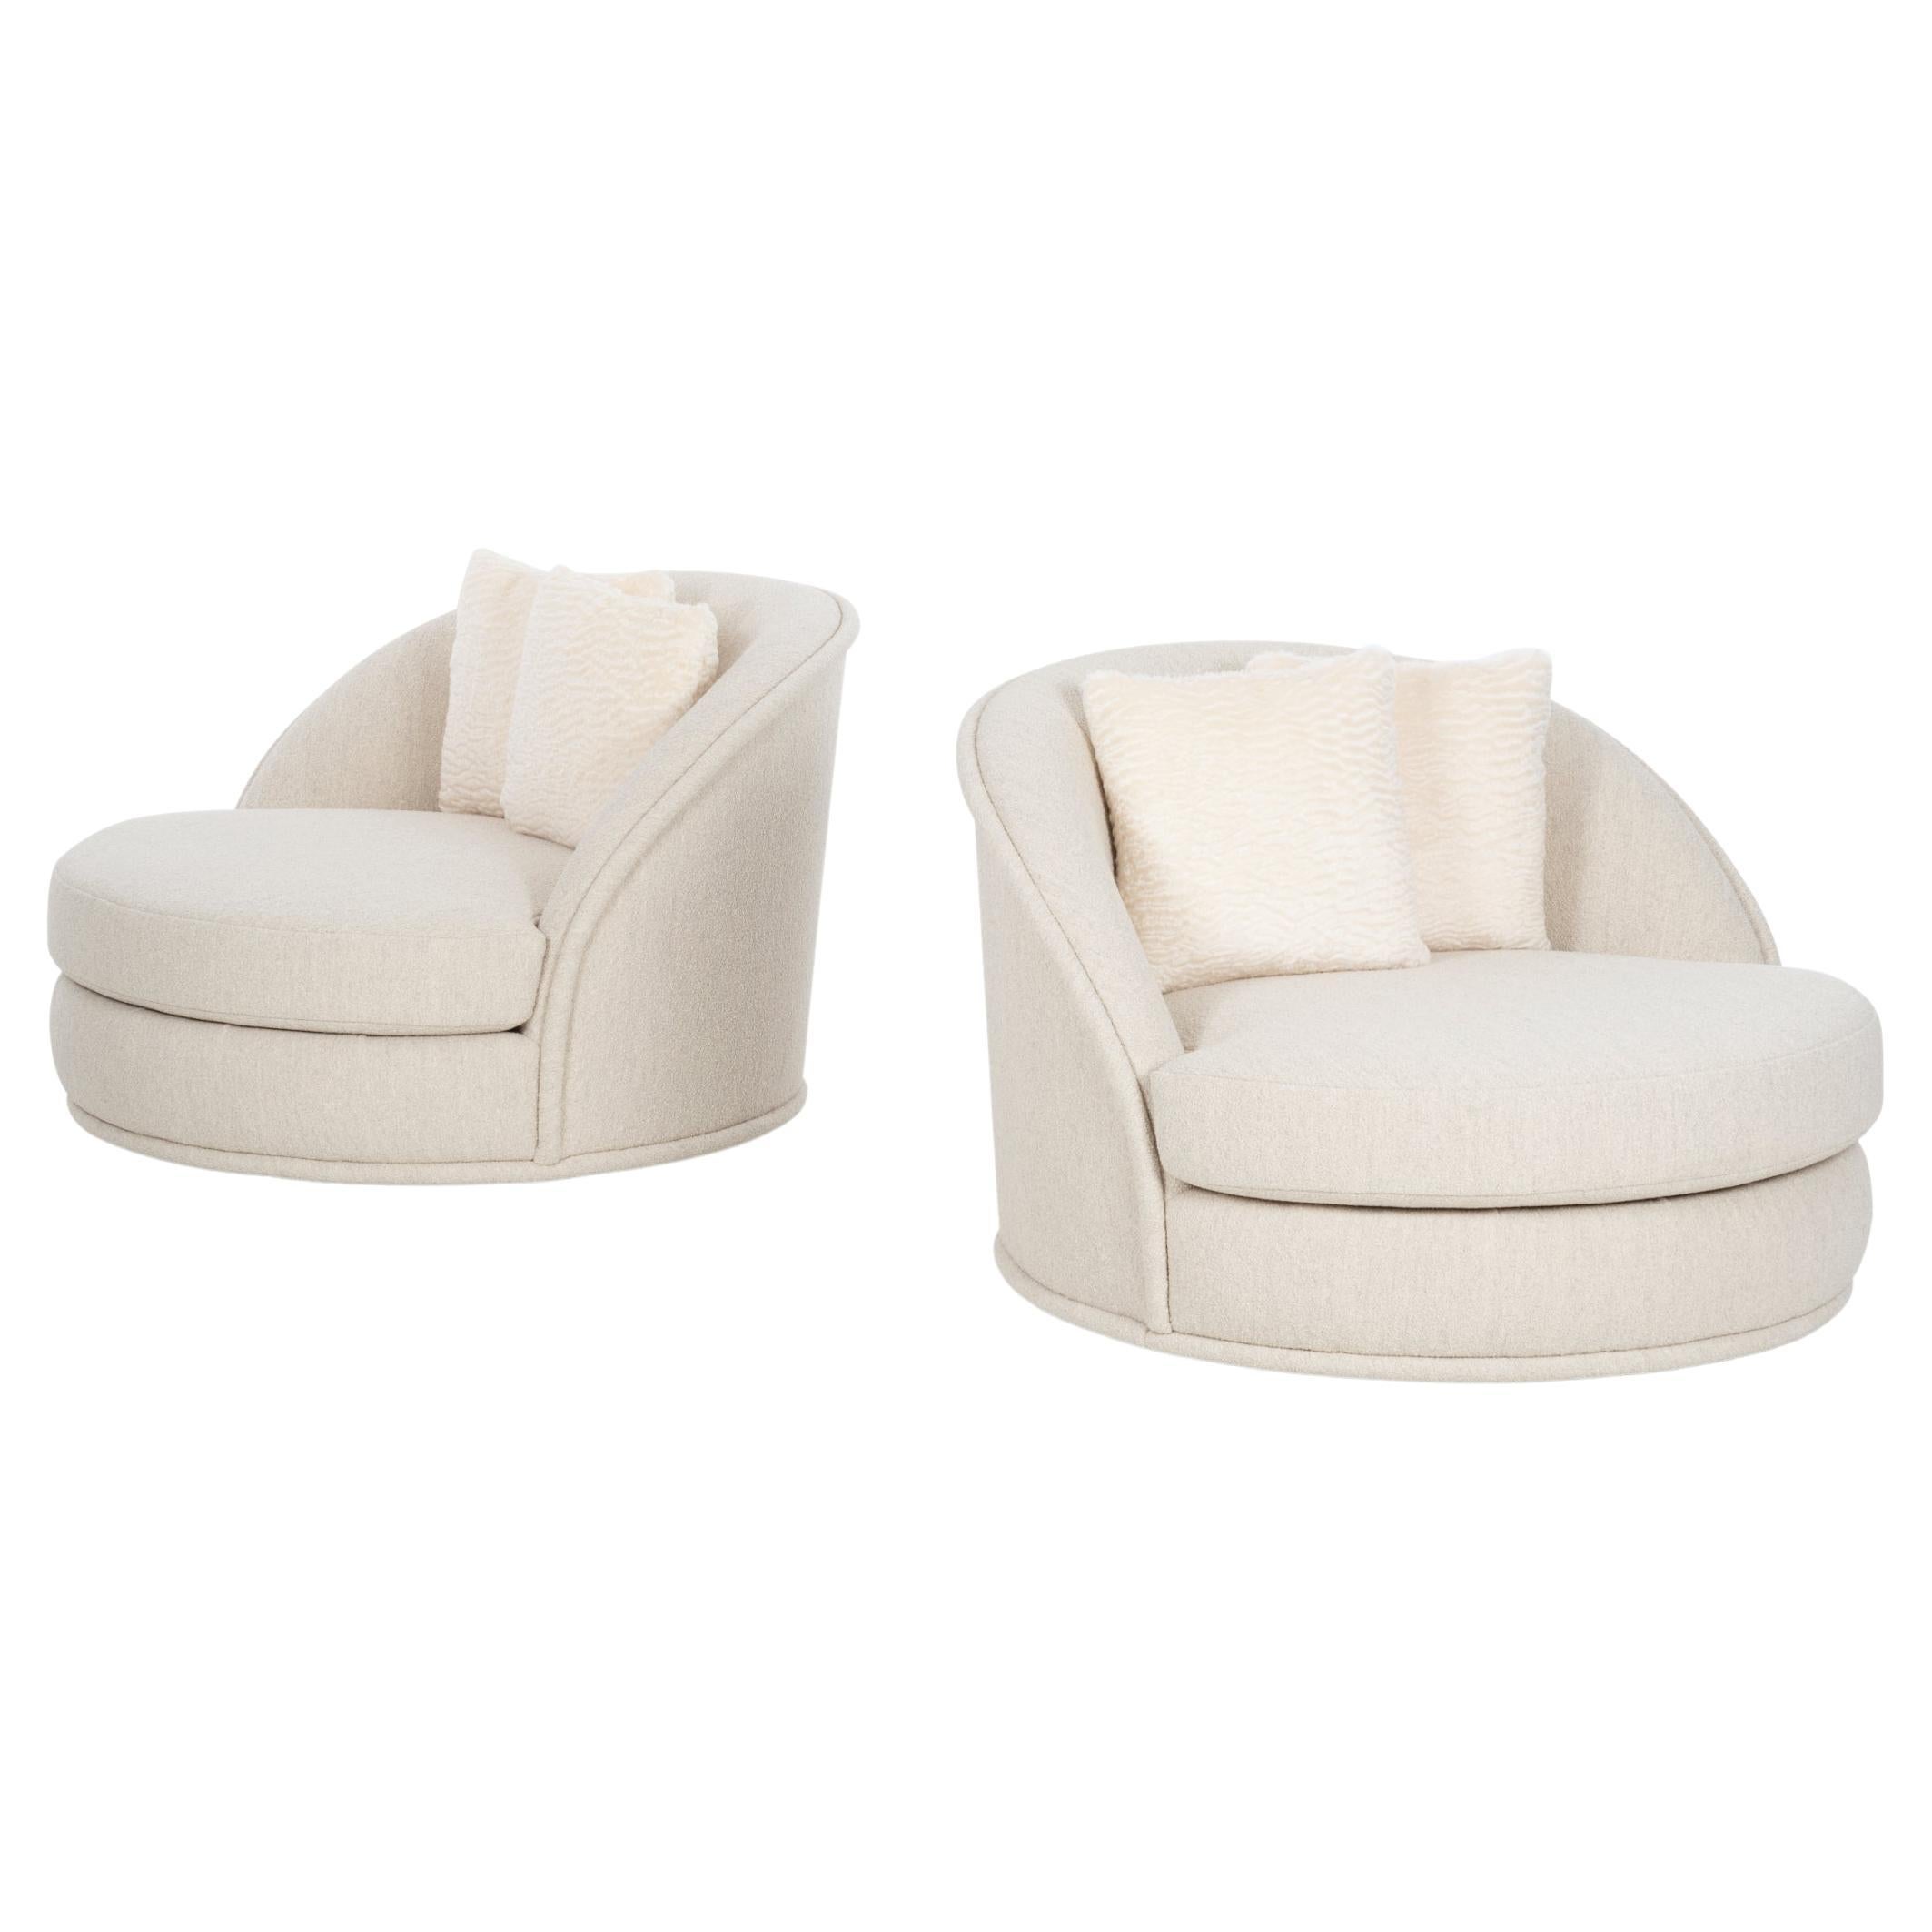 Pair of Milo Baughman Style Oversized Swivel Lounge Chairs by Directional